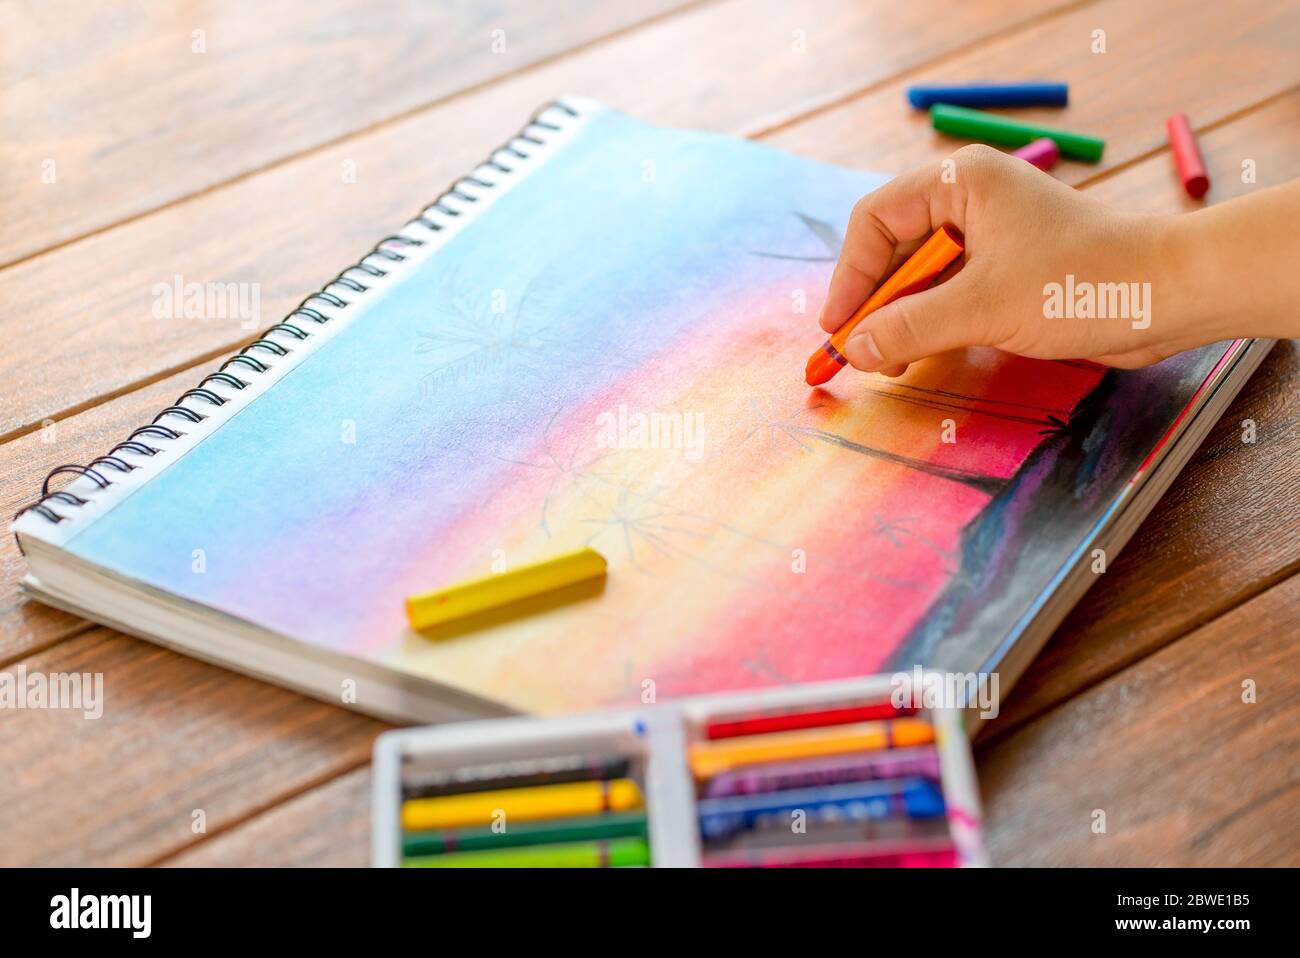 https://c8.alamy.com/comp/2BWE1B5/girls-hand-with-a-orange-wax-crayon-painting-on-a-white-paper-and-colorful-wax-crayons-in-the-background-2BWE1B5.jpg